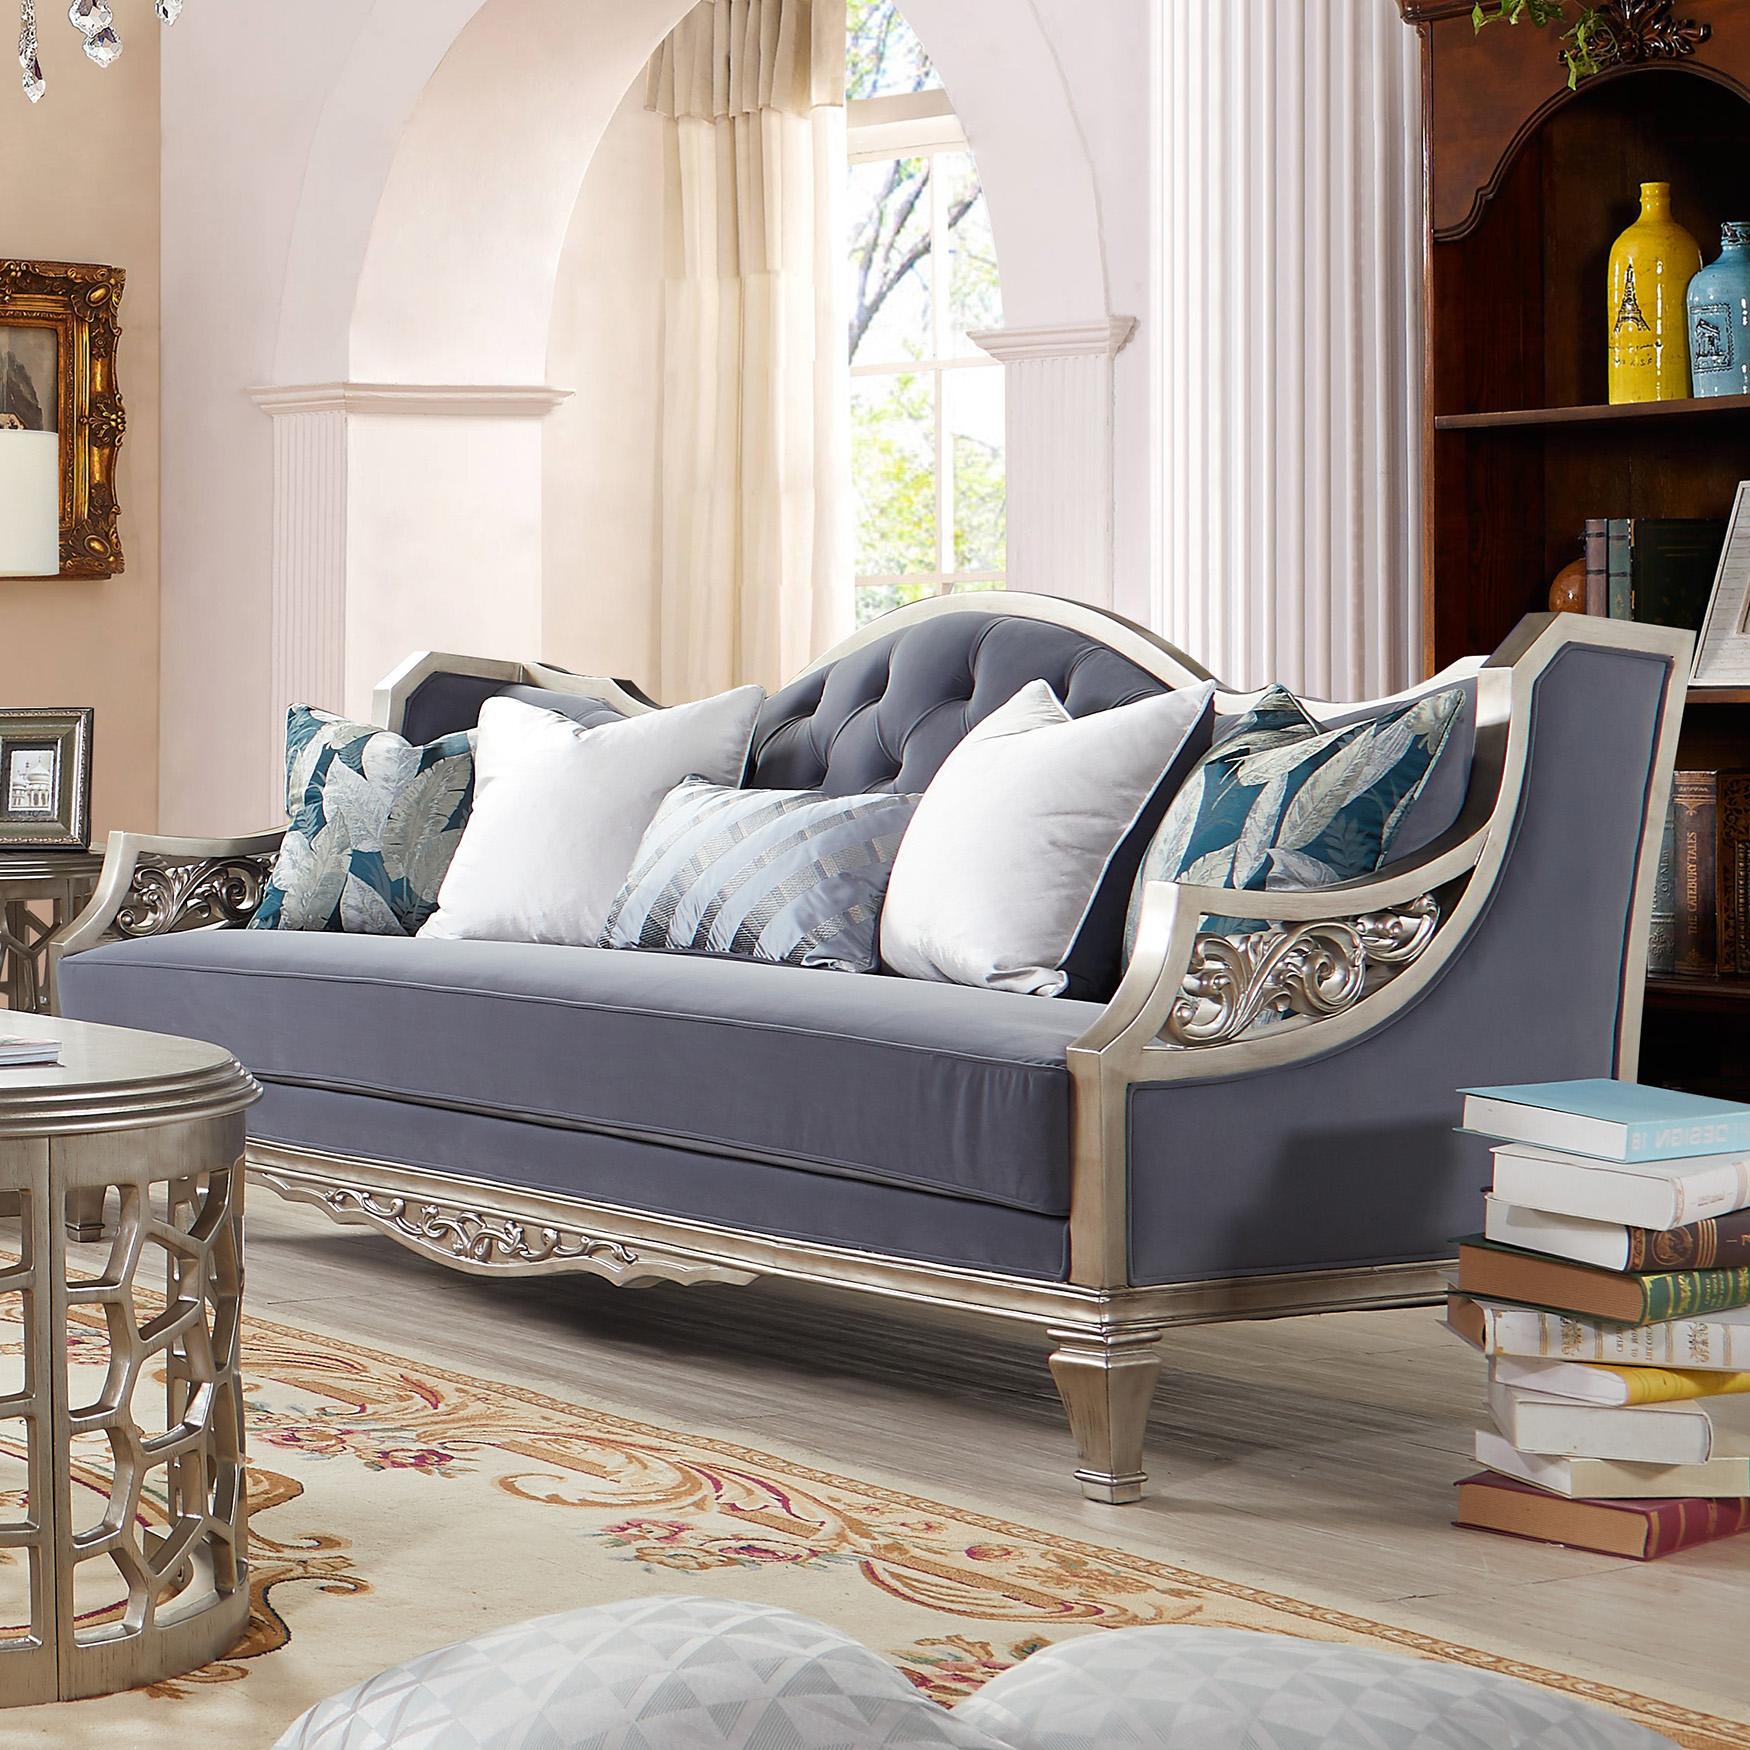 Traditional Sofa HD-701 HD-S701 in Silver, Cobalt blue Fabric